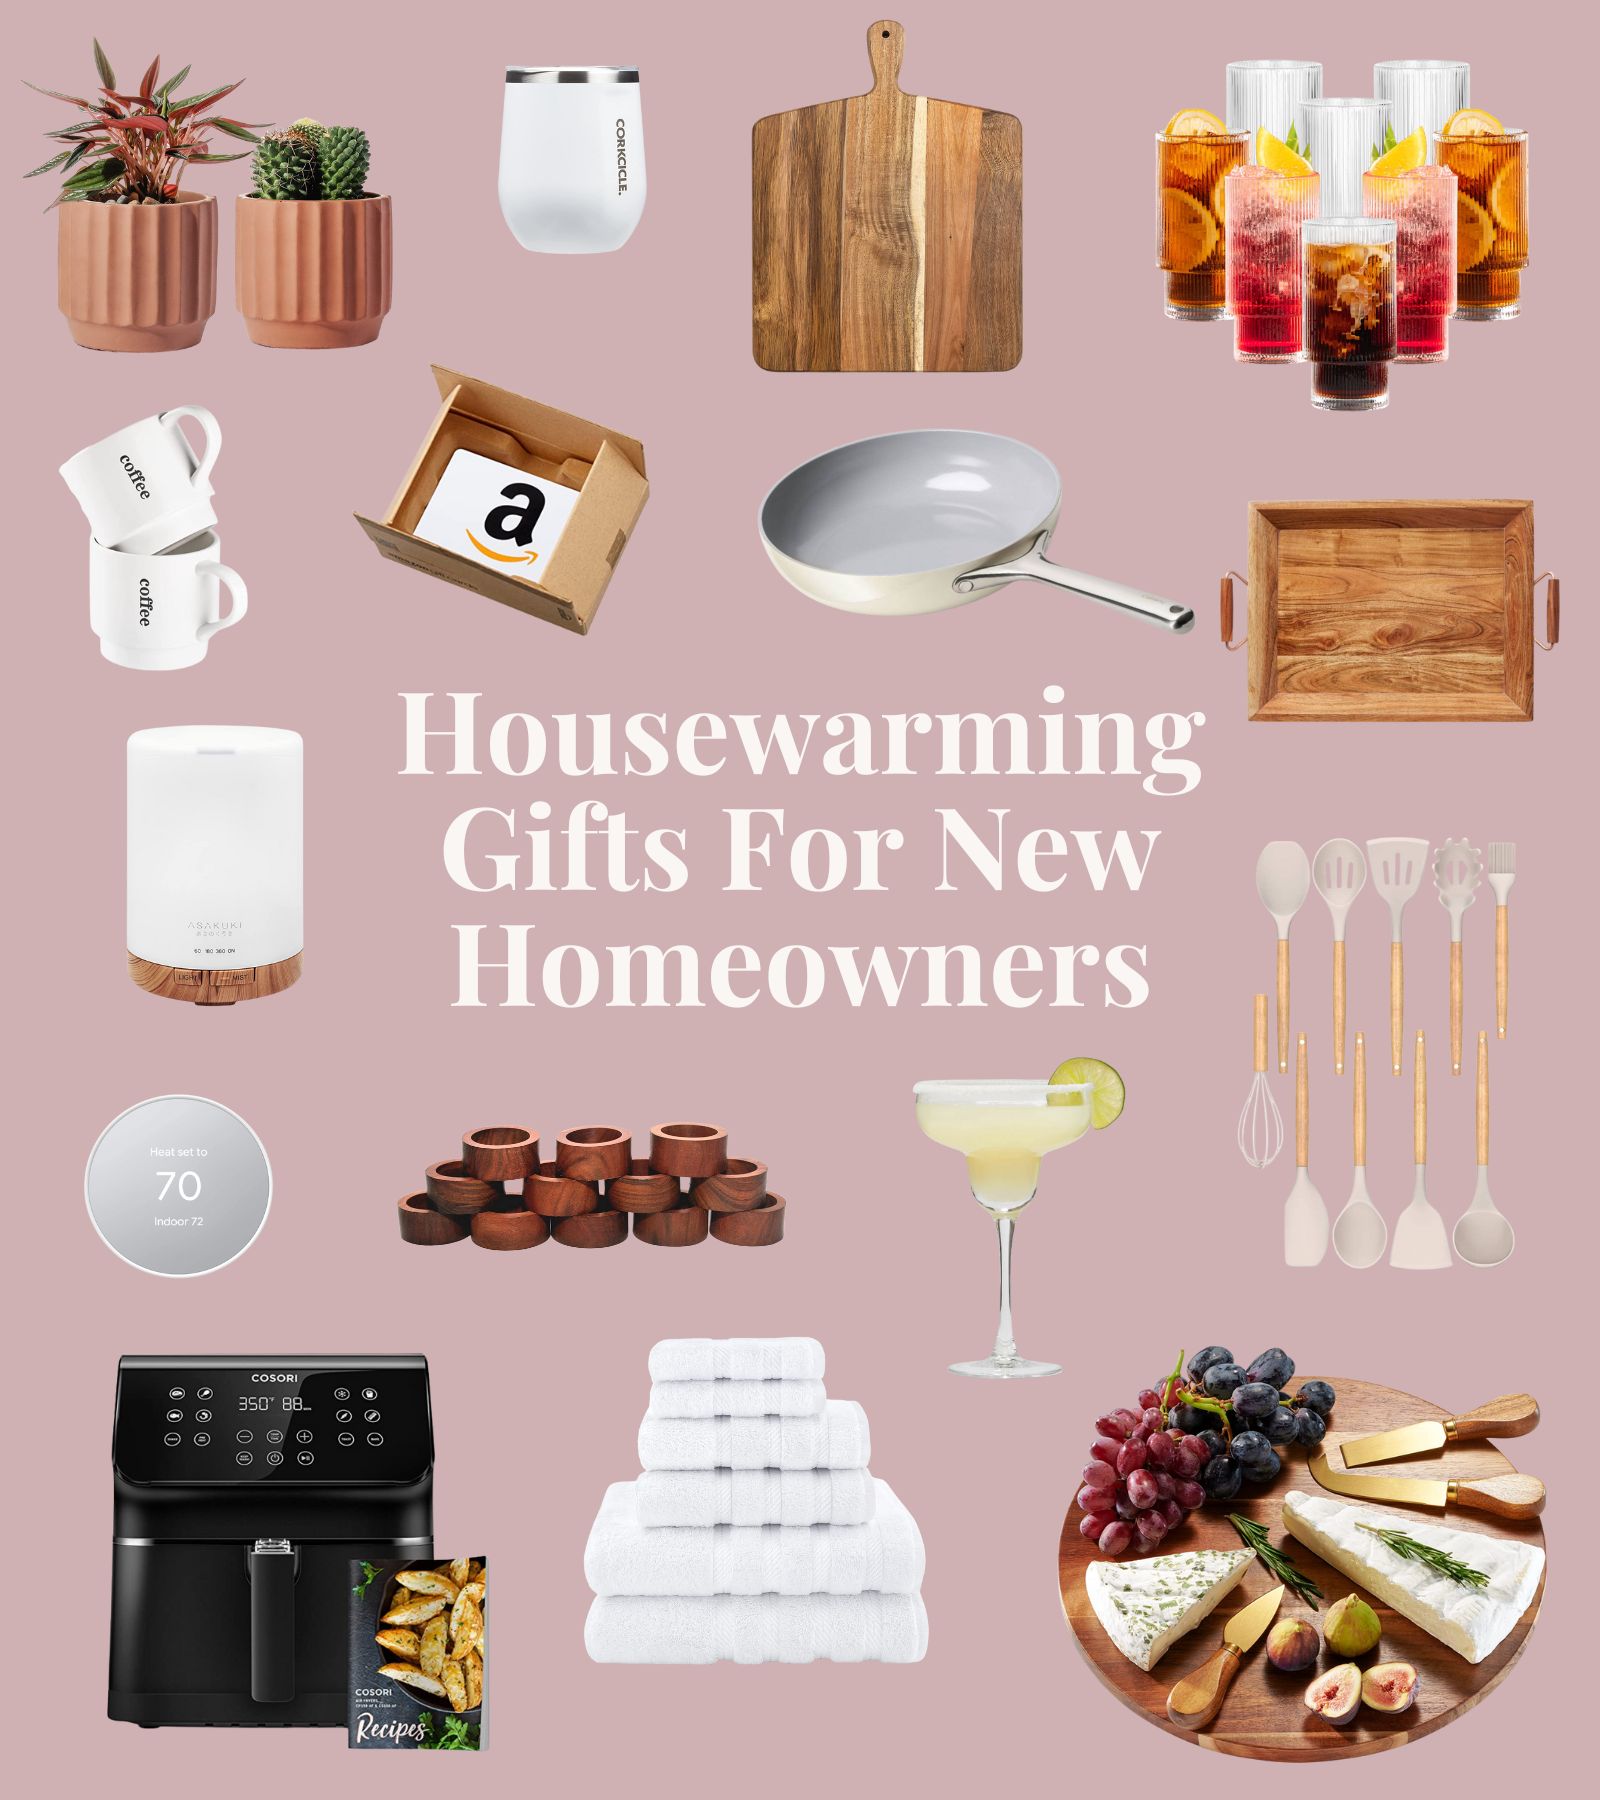 https://homebyalley.com/wp-content/uploads/2023/03/Housewarming-Gifts-For-New-Homeowners.jpg